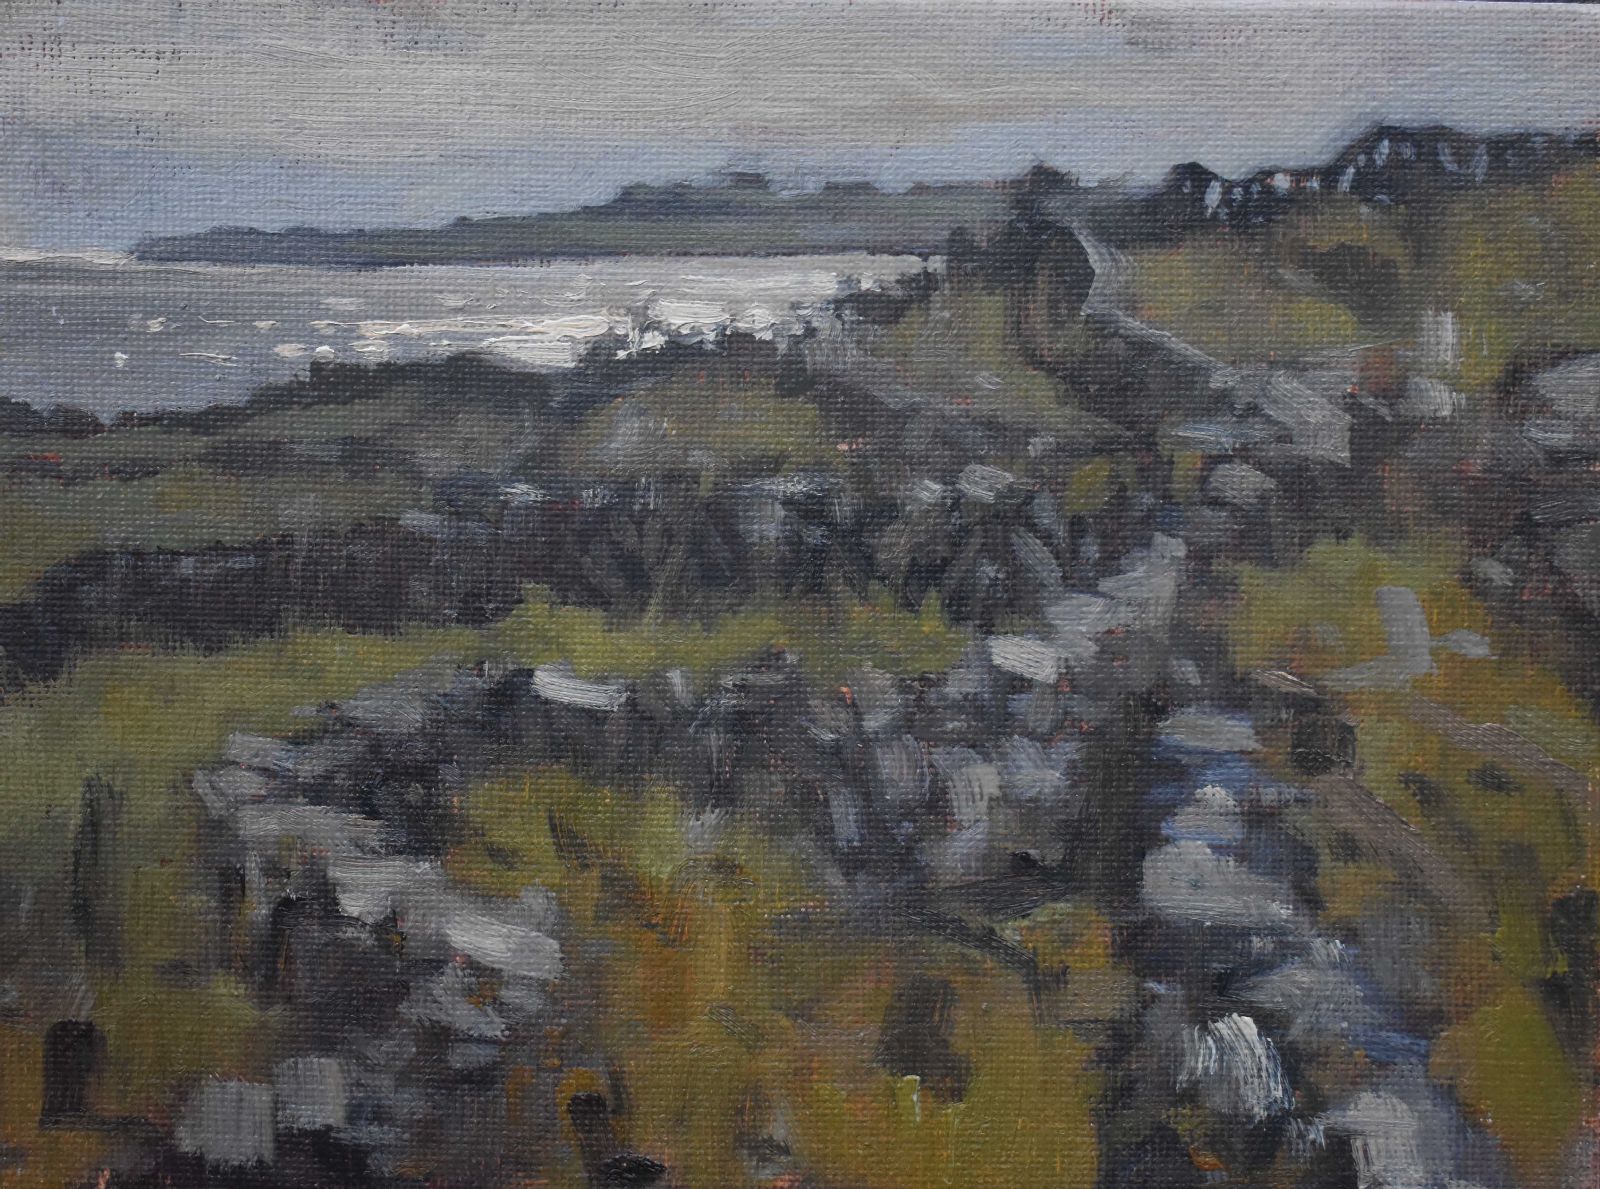 Dave West - Stone Fields (Inisheer)